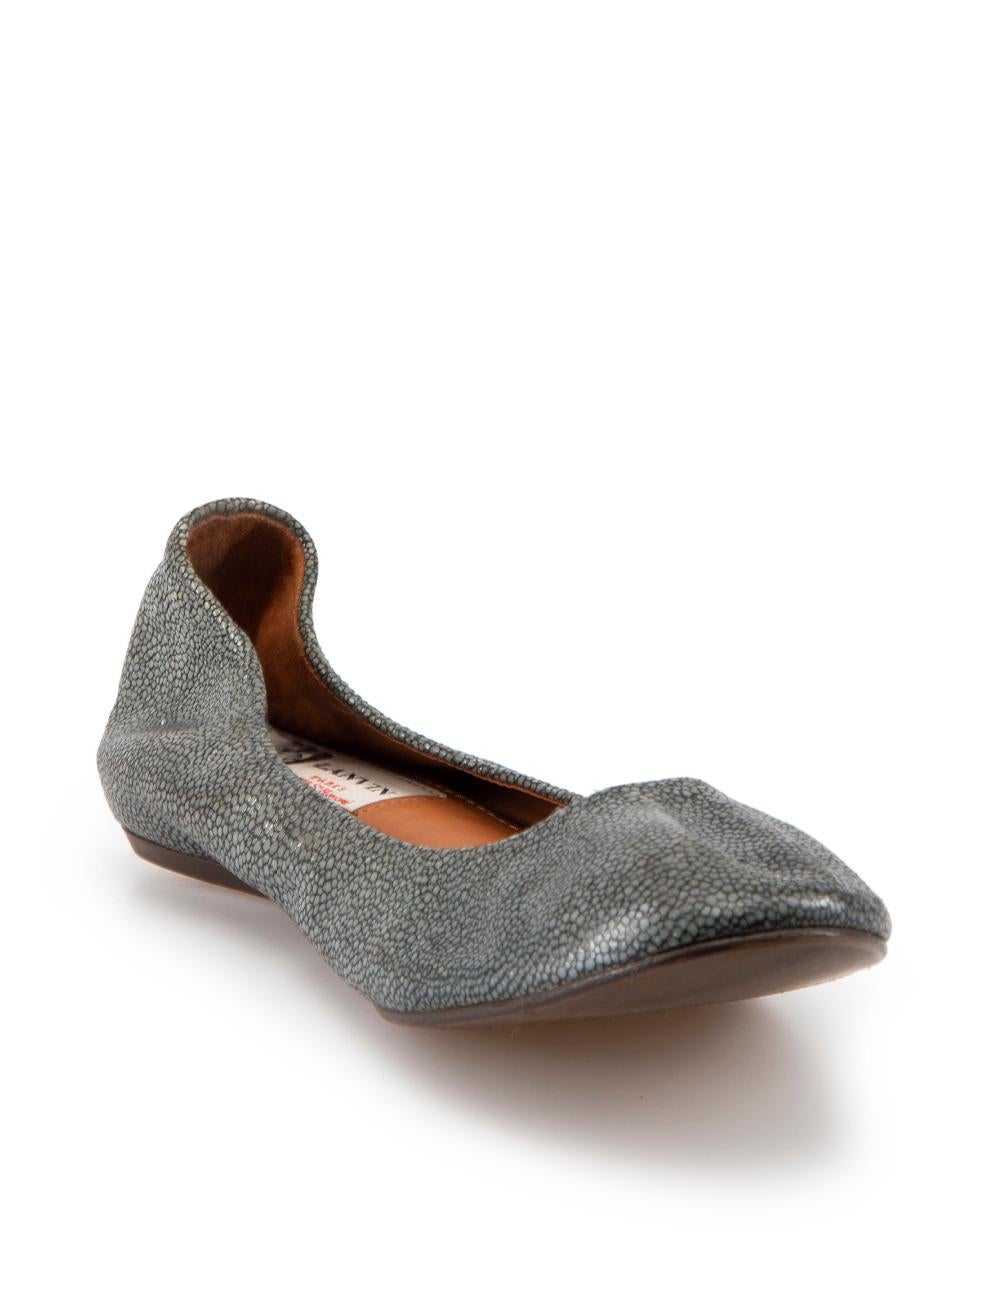 CONDITION is Good. Minor wear to flats is evident. Light wear to uppers with metallic marks found throughout, insoles and outsoles show noticeable signs of wear also on this used Lanvin designer resale item.
 
Details
Grey
Stingray leather
Ballet